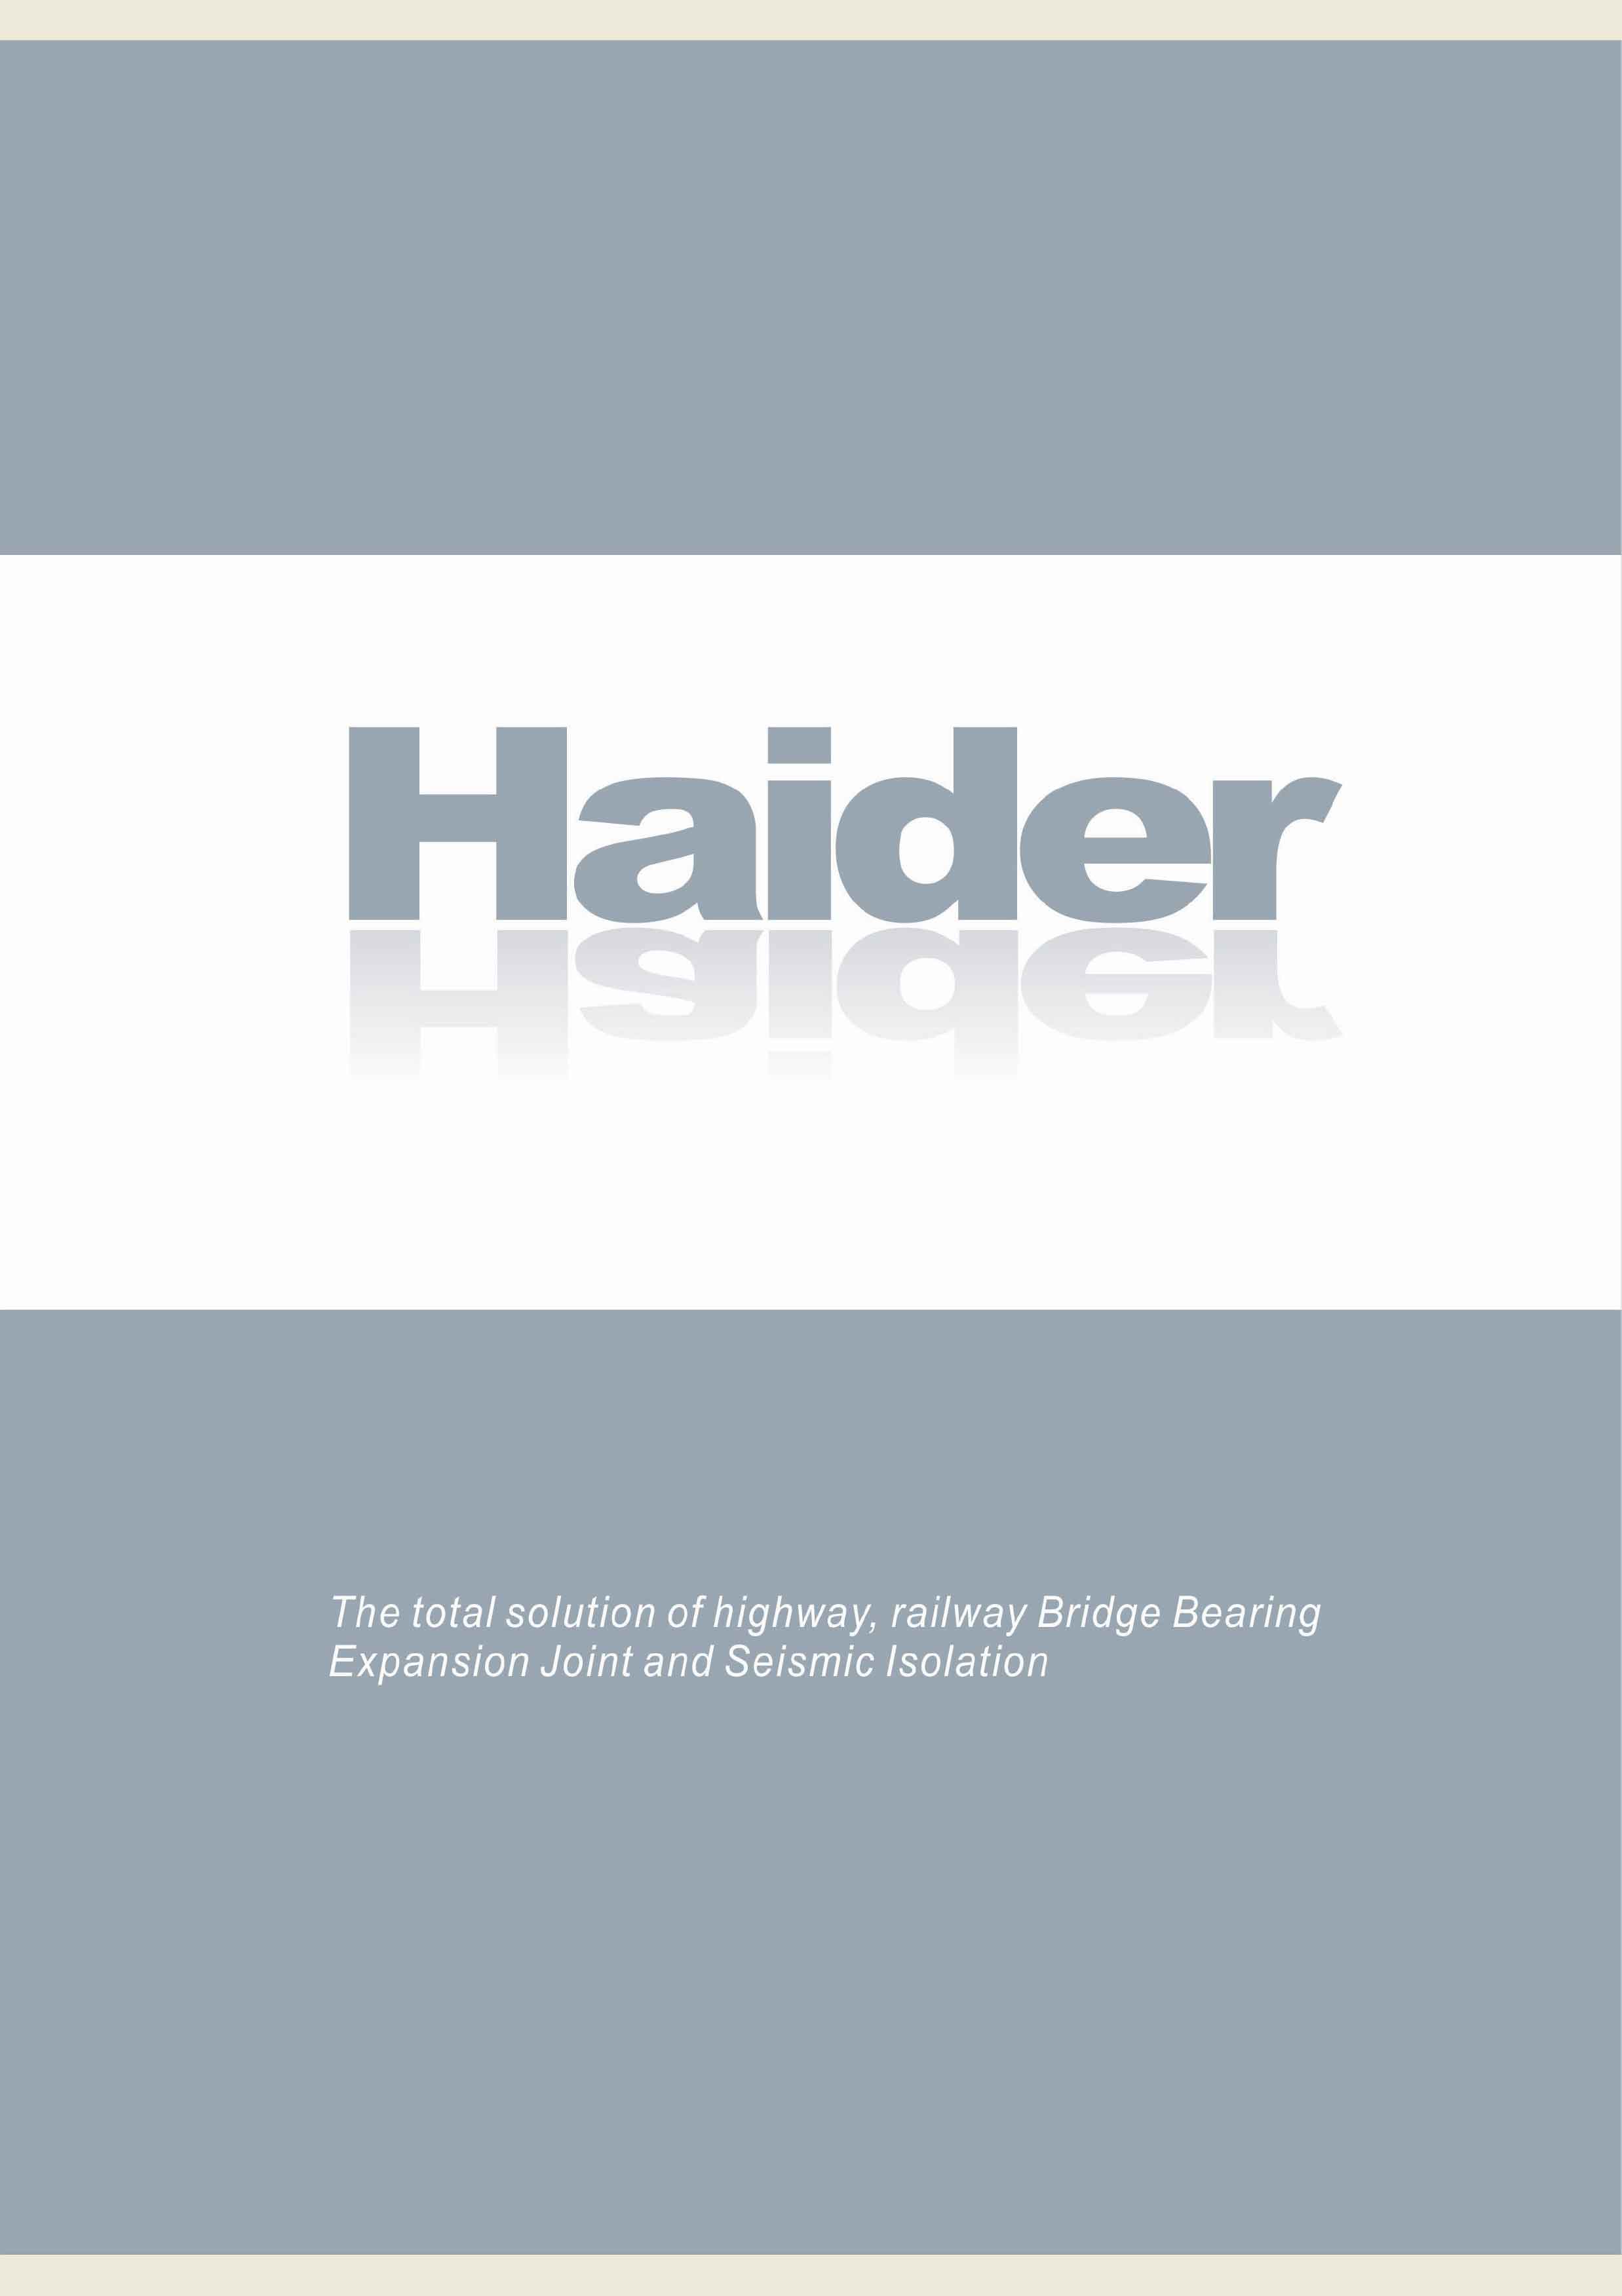 The total solution of highway,railway Bridge Bearing Expansion Joint and Seismic Isolation